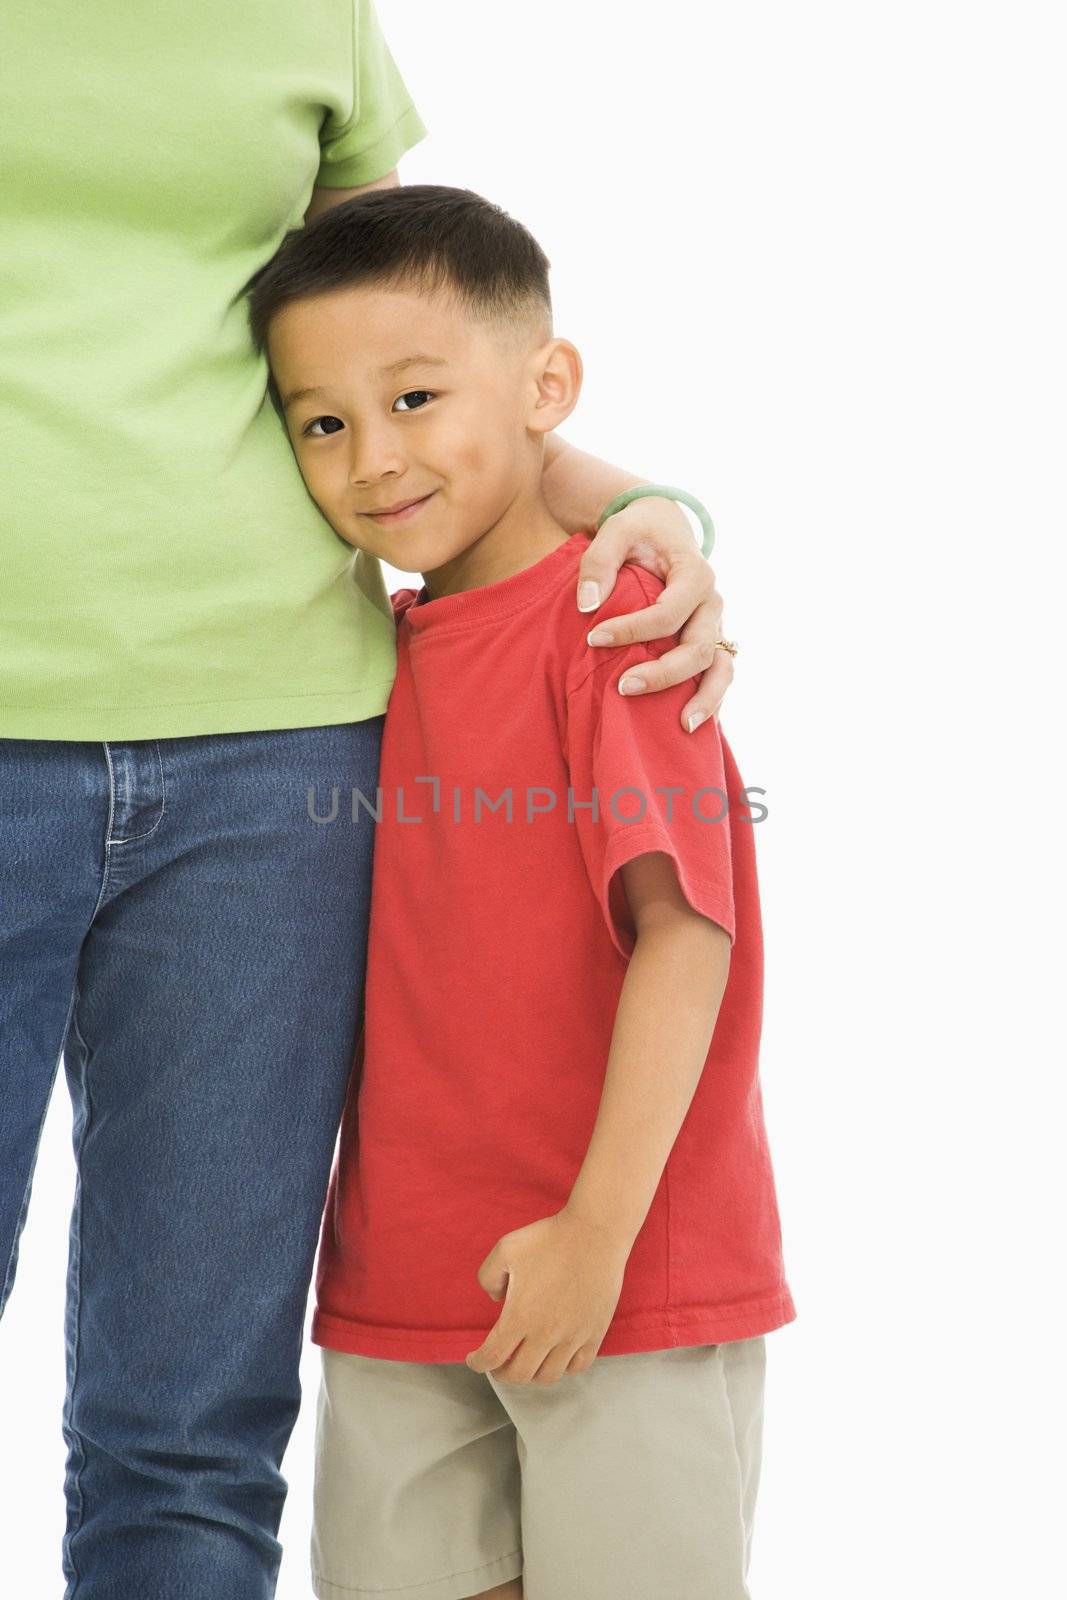 Asian mother standing with arm around son.